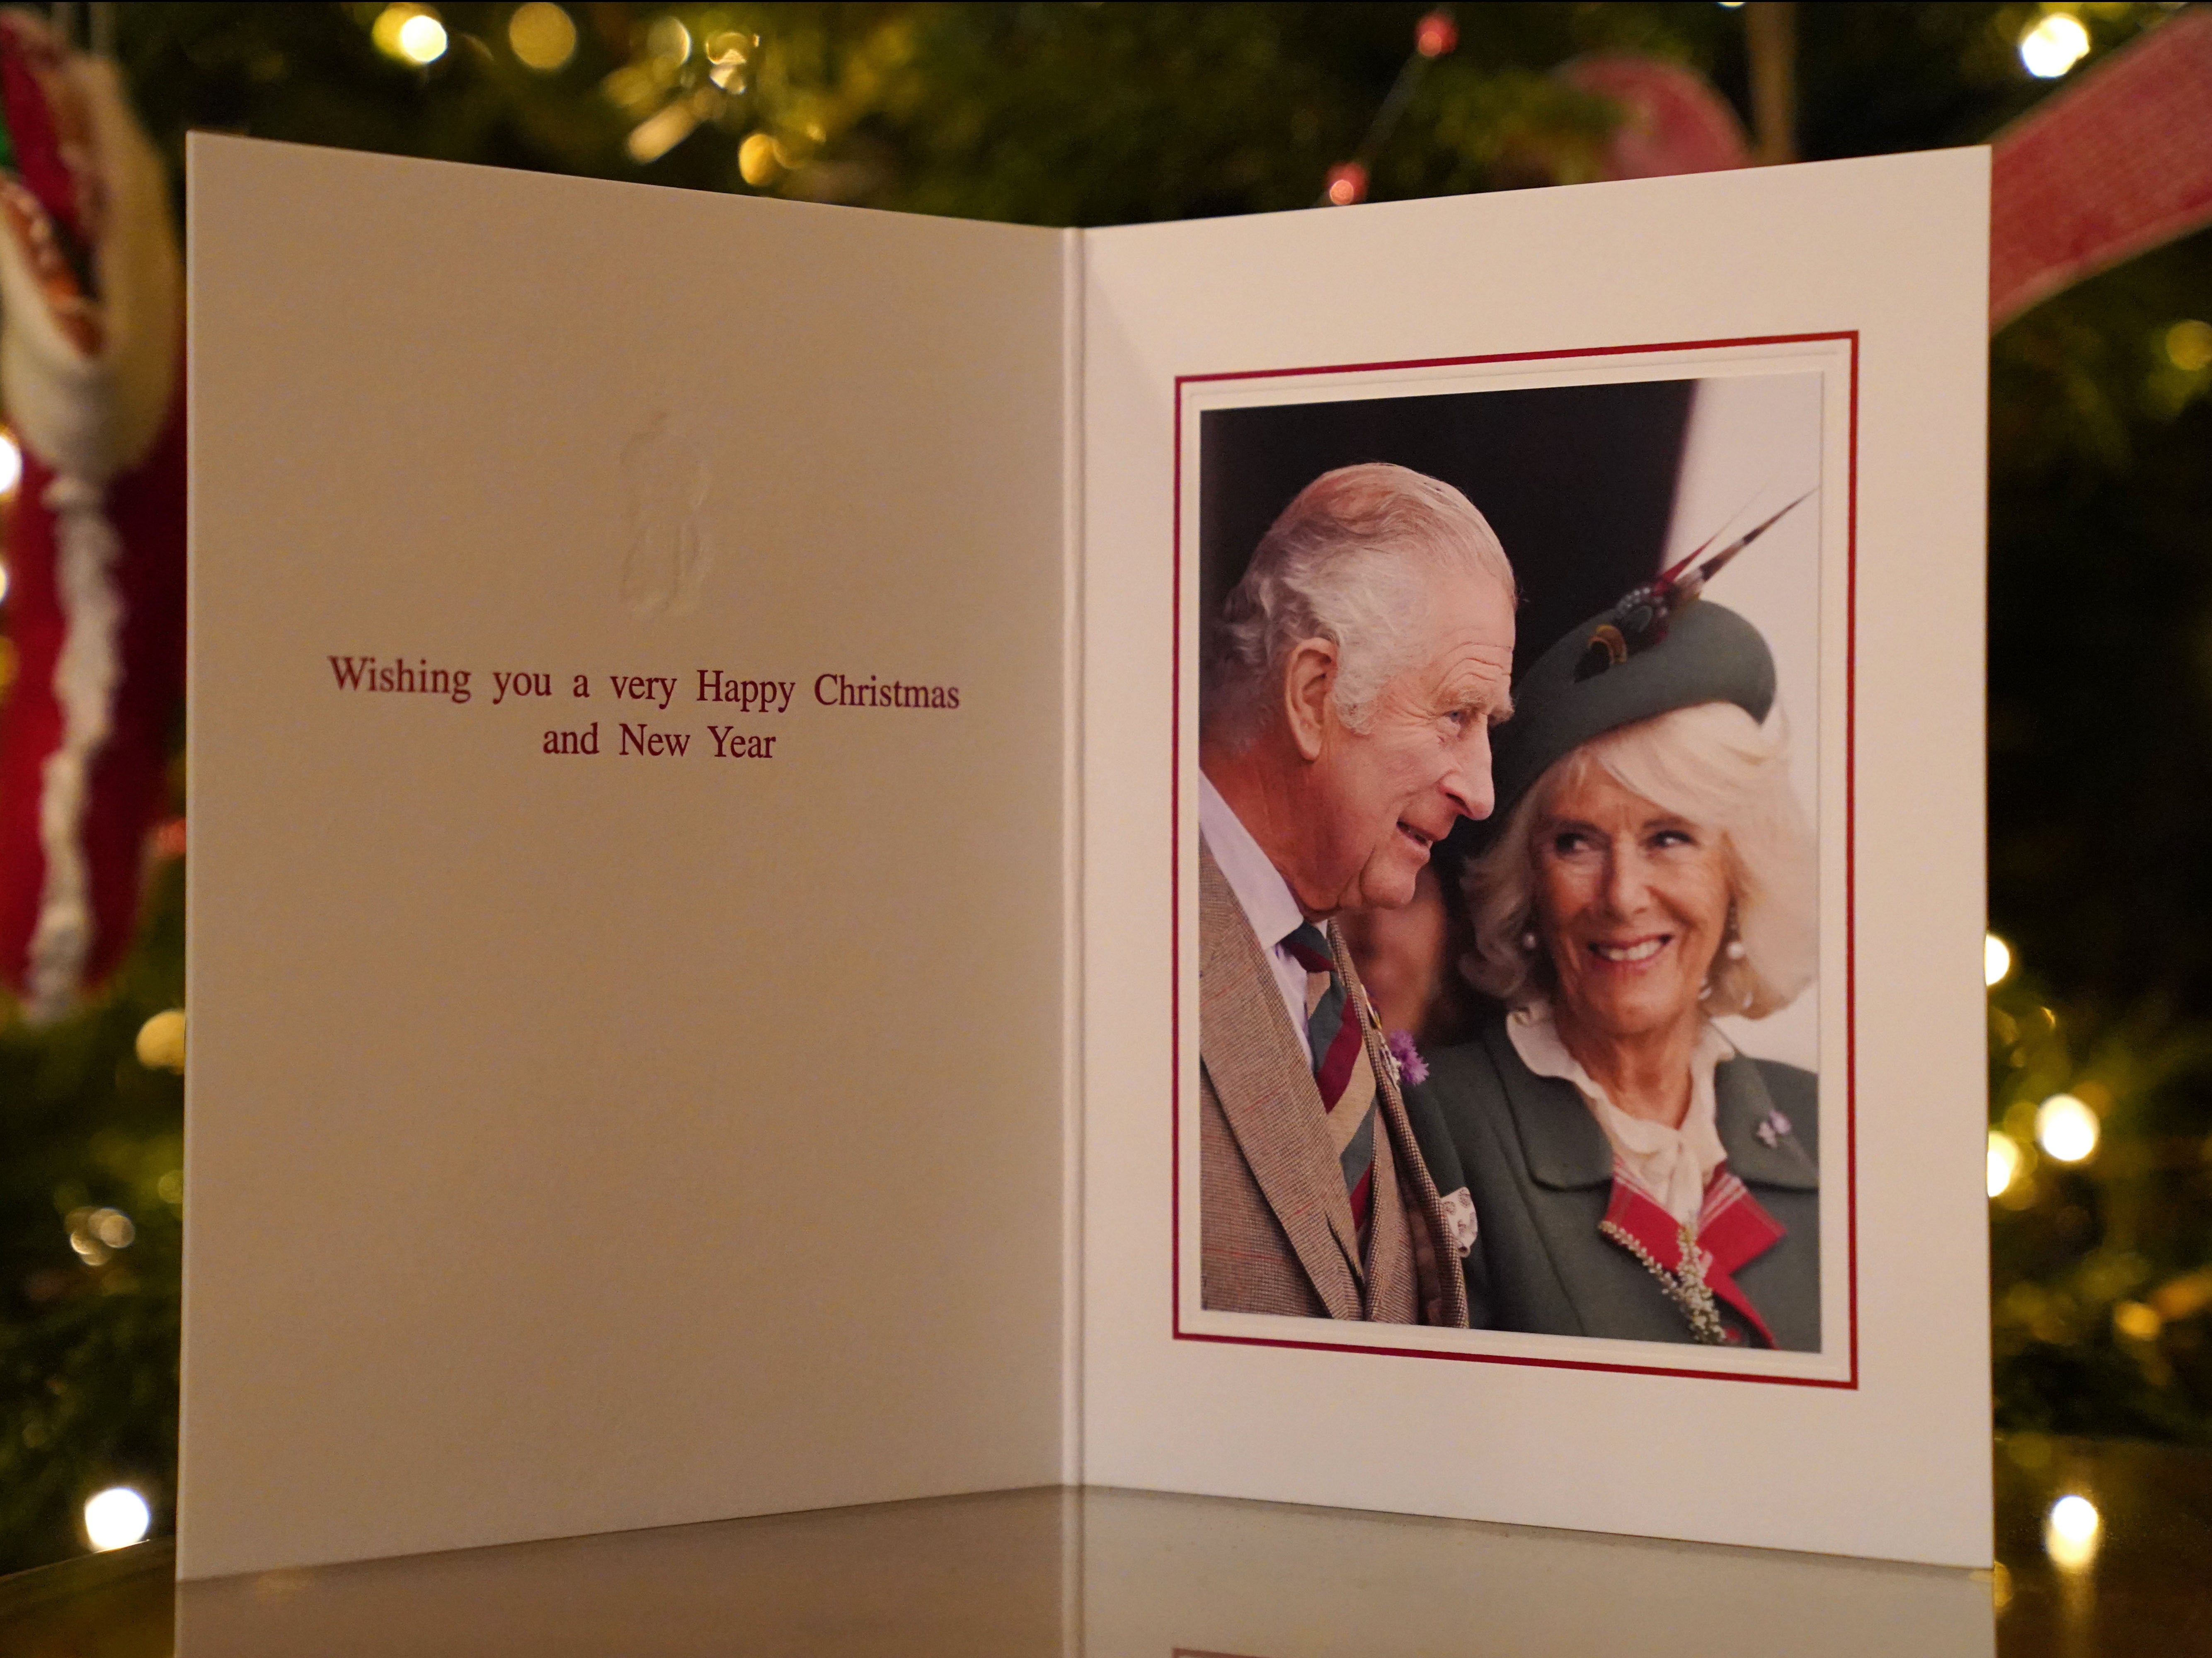 The 2022 Christmas card of King Charles III and Camilla, Queen Consort in front of a Christmas tree in Clarence House, on December 11, 2022